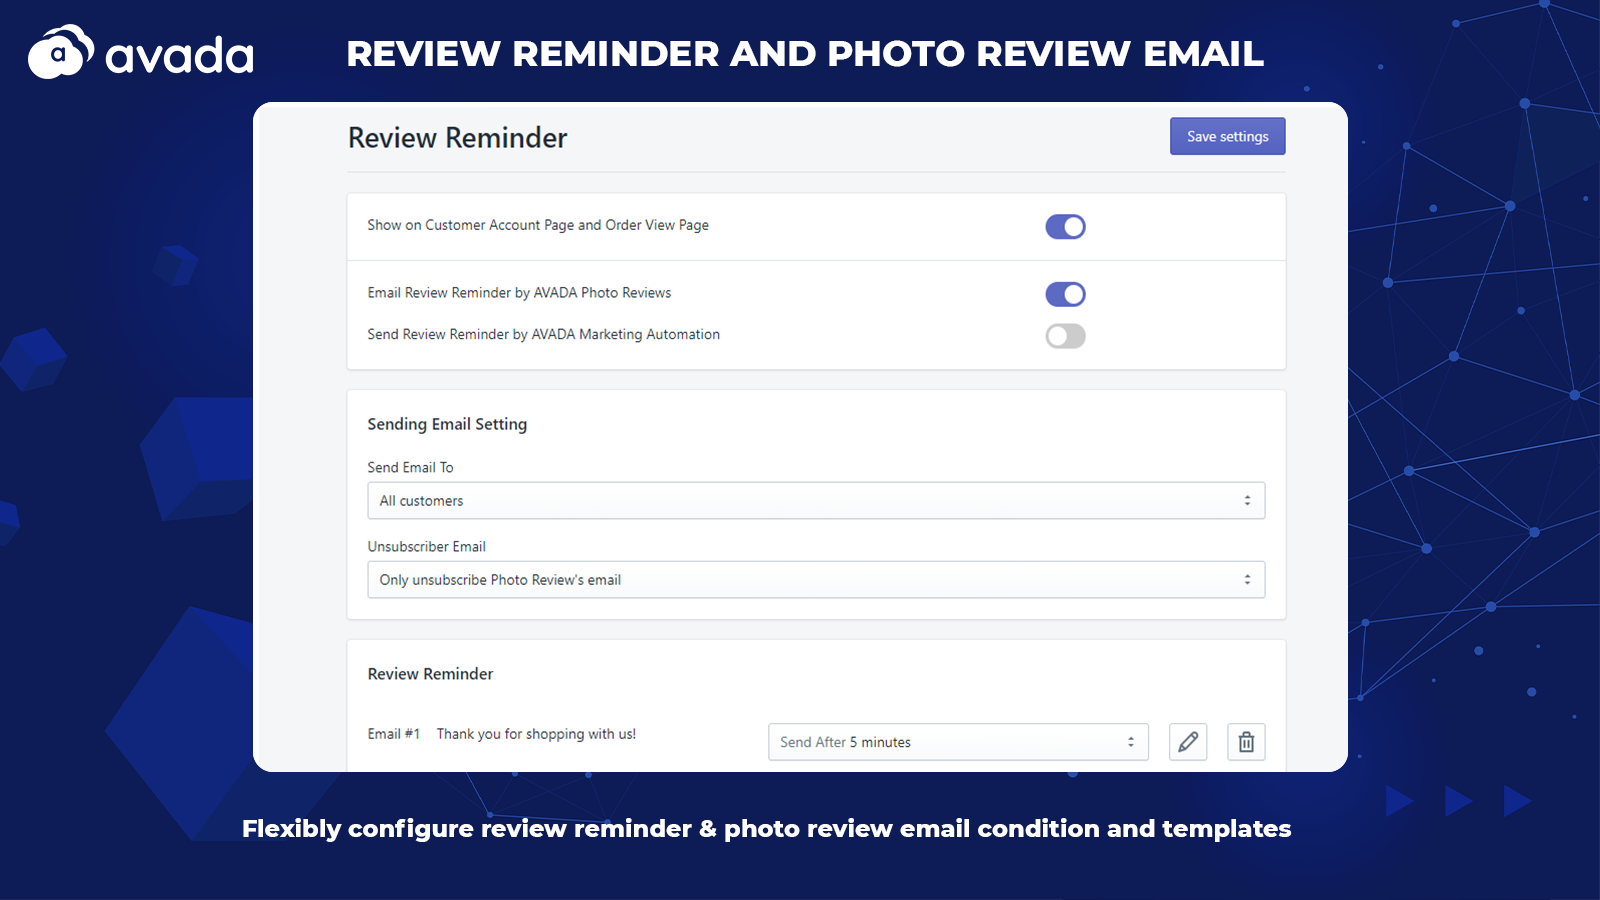 Configure review reminder and photo review email